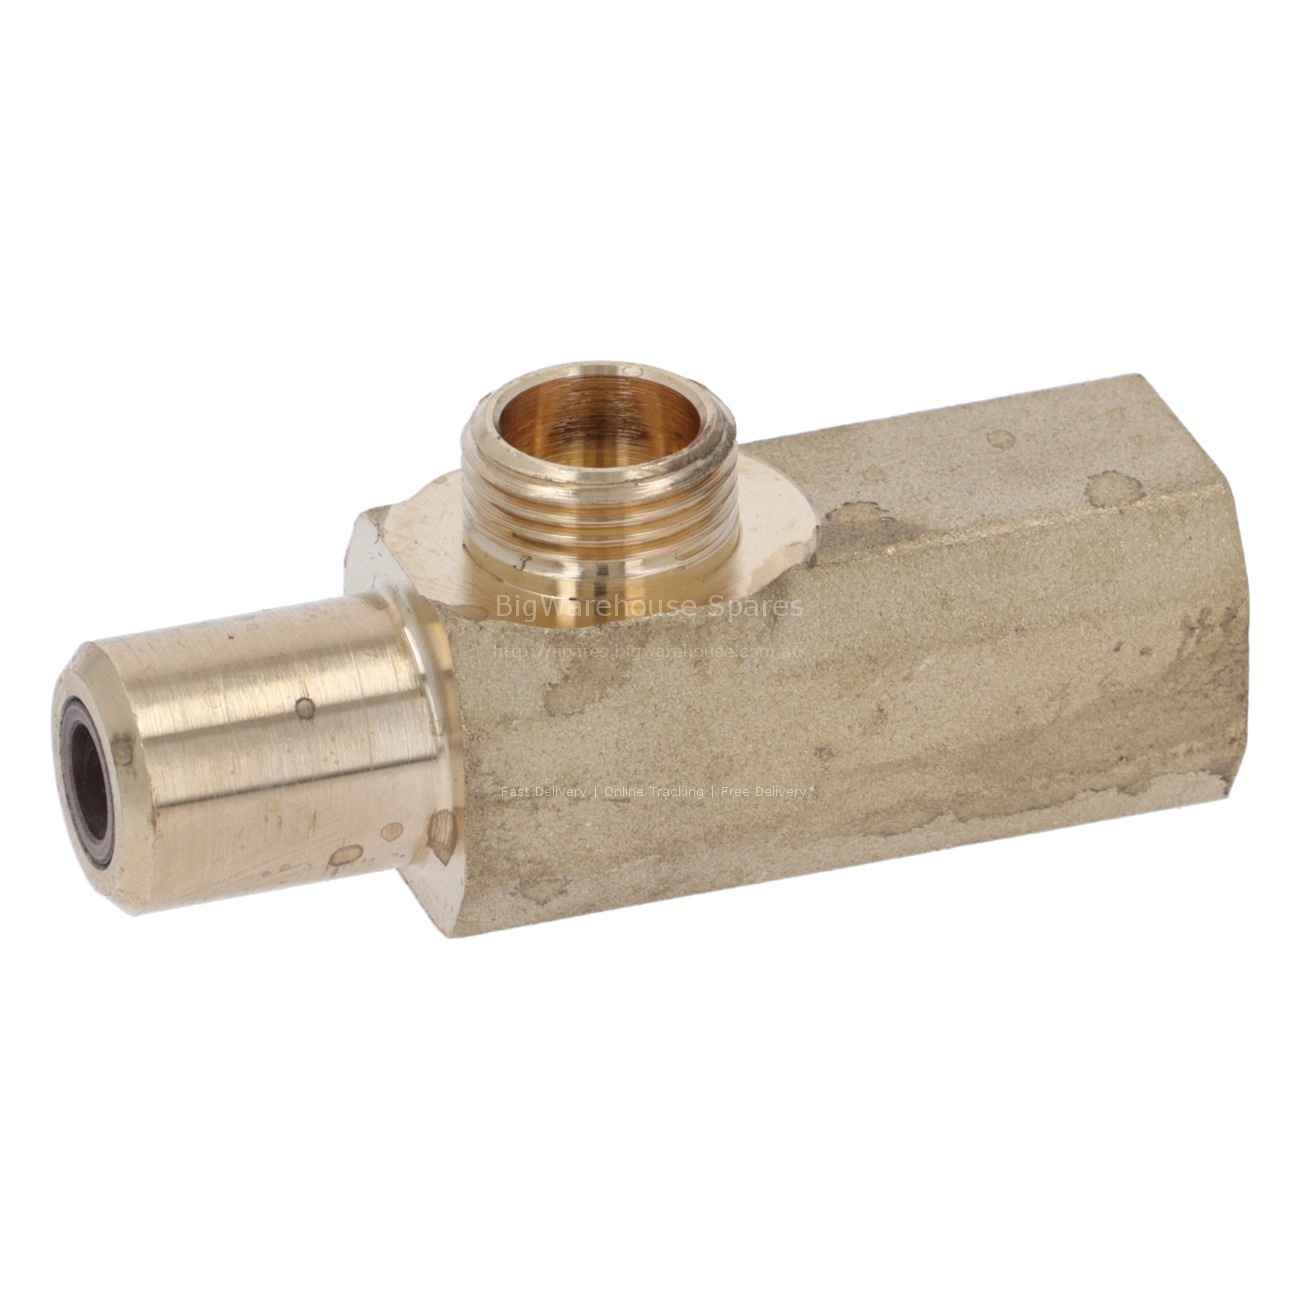 STEAM TAP BODY FOR ARTICULATED BRASS NOZ